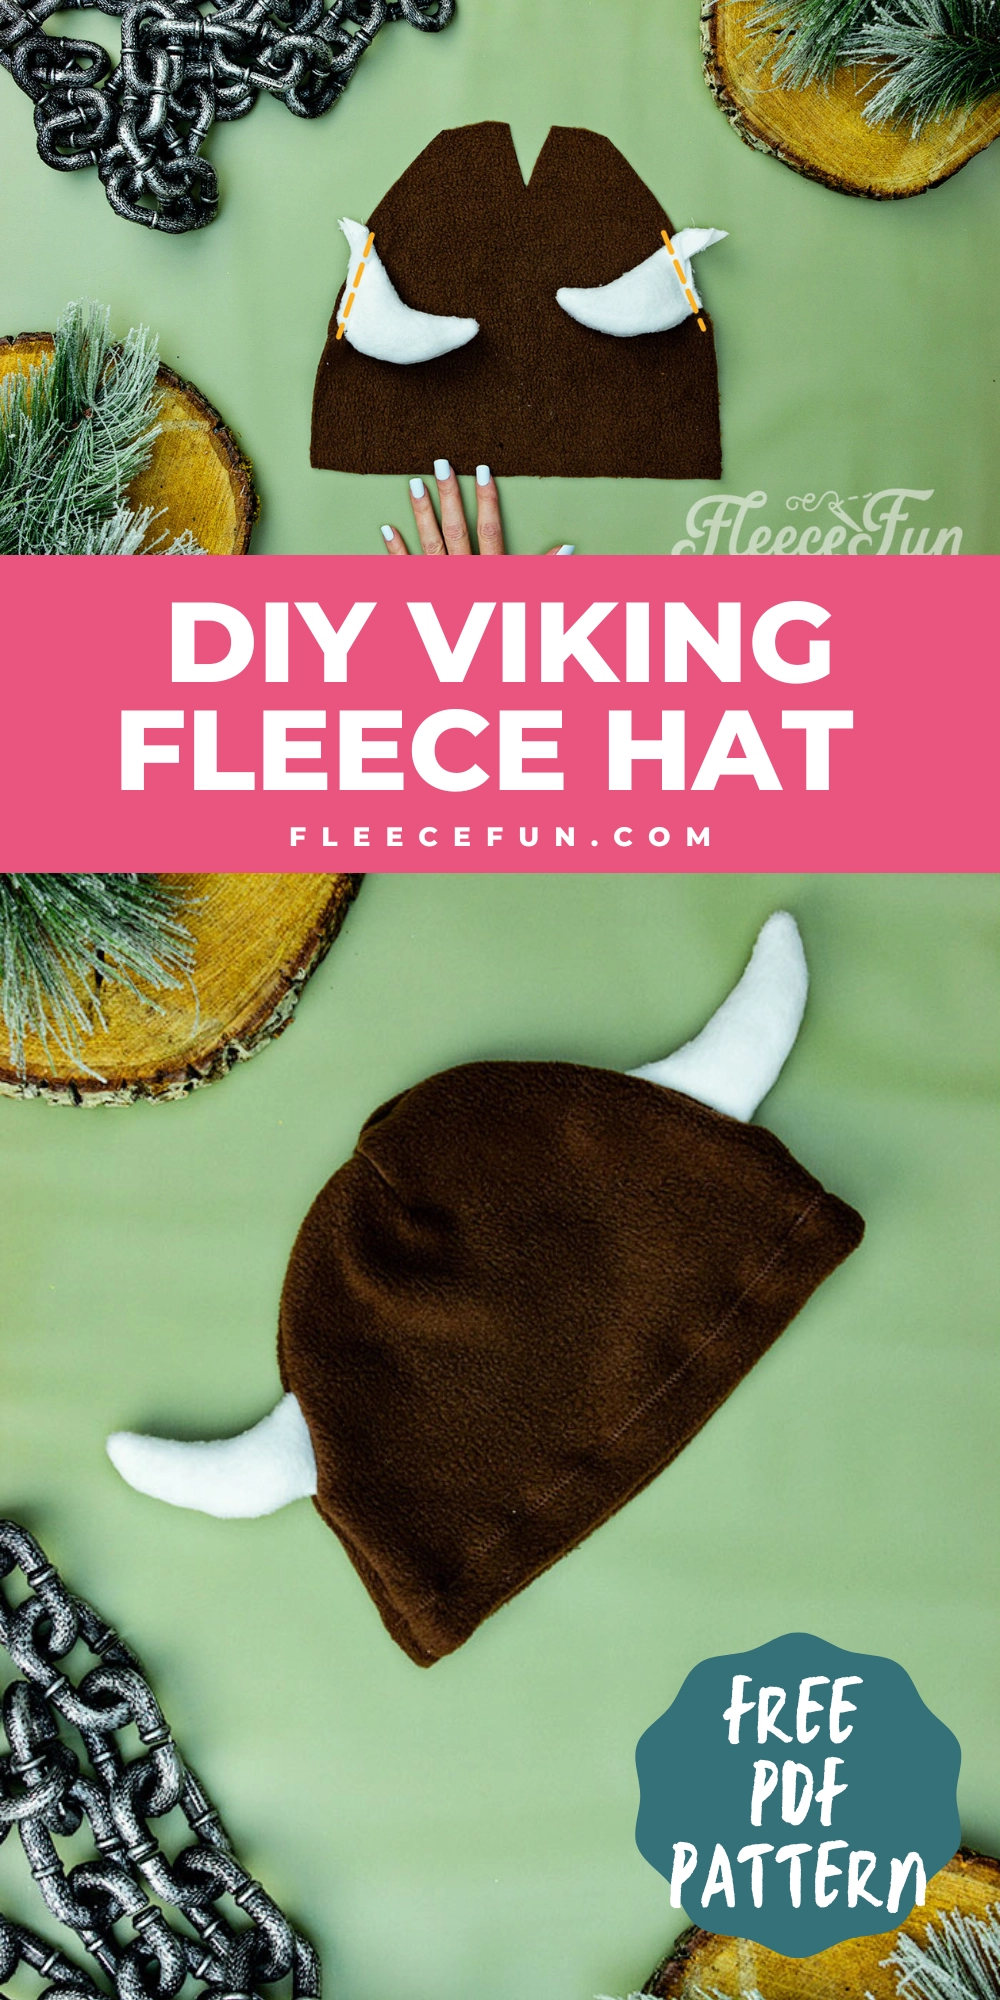 I love this fleece hat with horns. Such an easy sewing DIY. Great idea for a fun hat for kids to wear. Love that there is a video tutorial too! Good sewing project. Perfect for my little Viking.